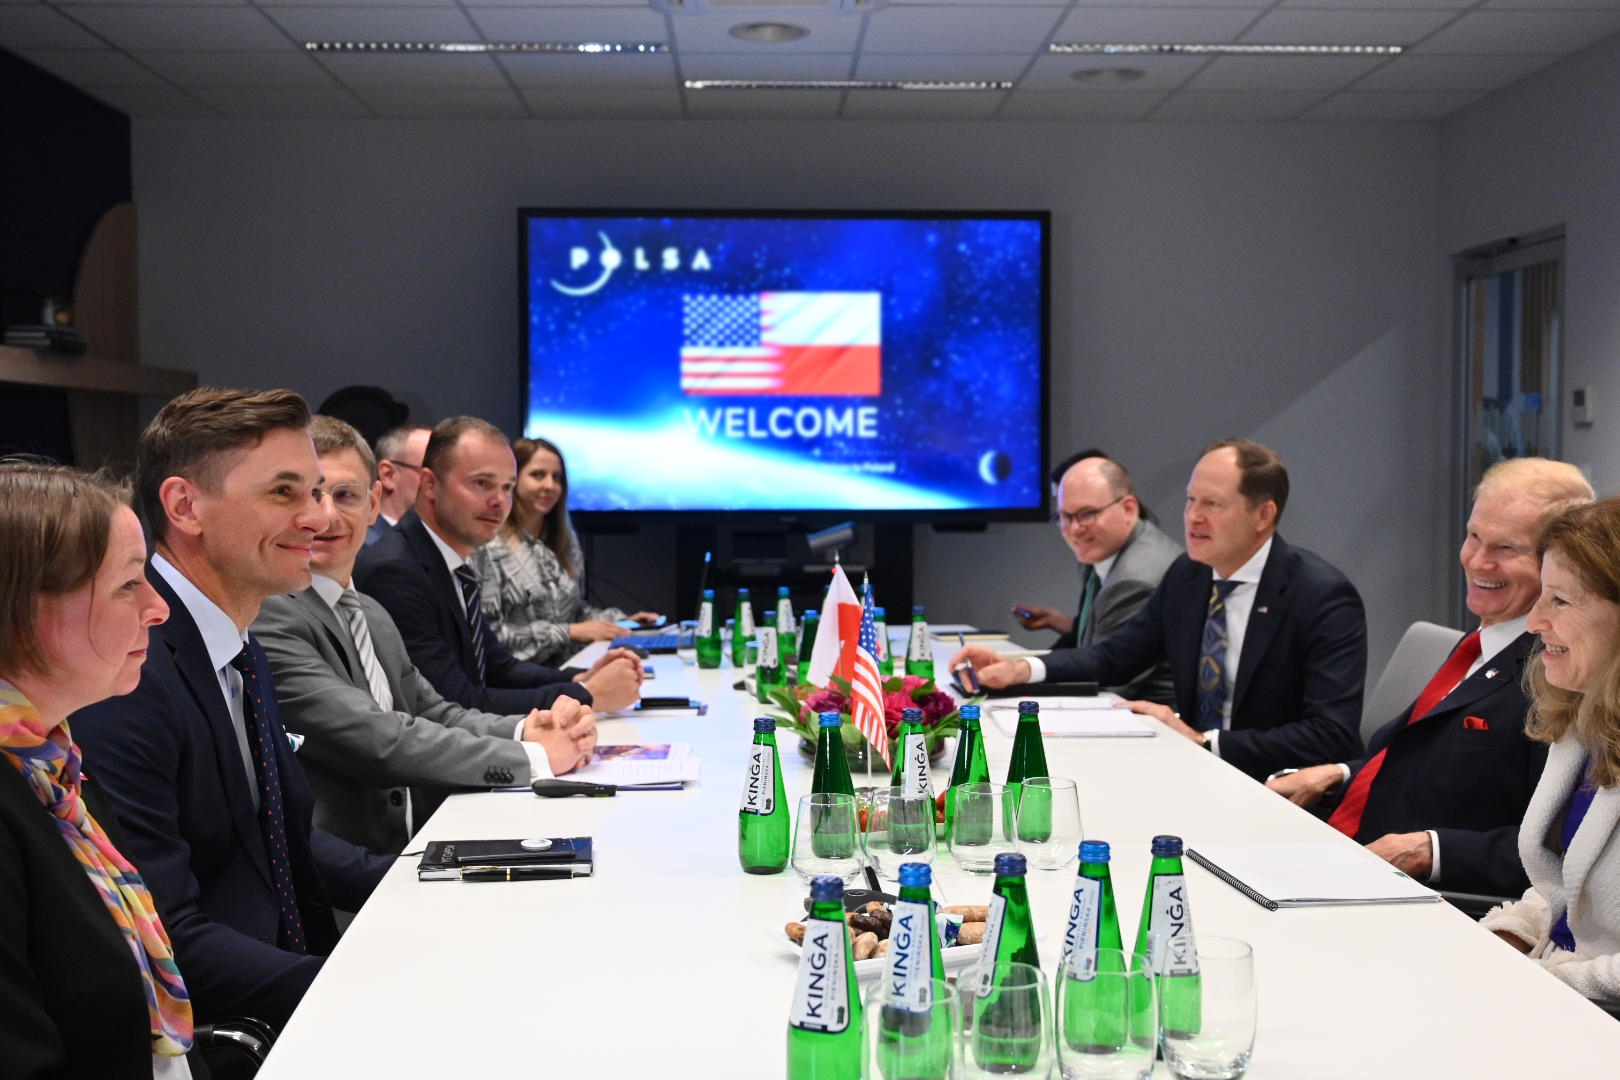 Visit of the head of NASA to the Polish Space Agency